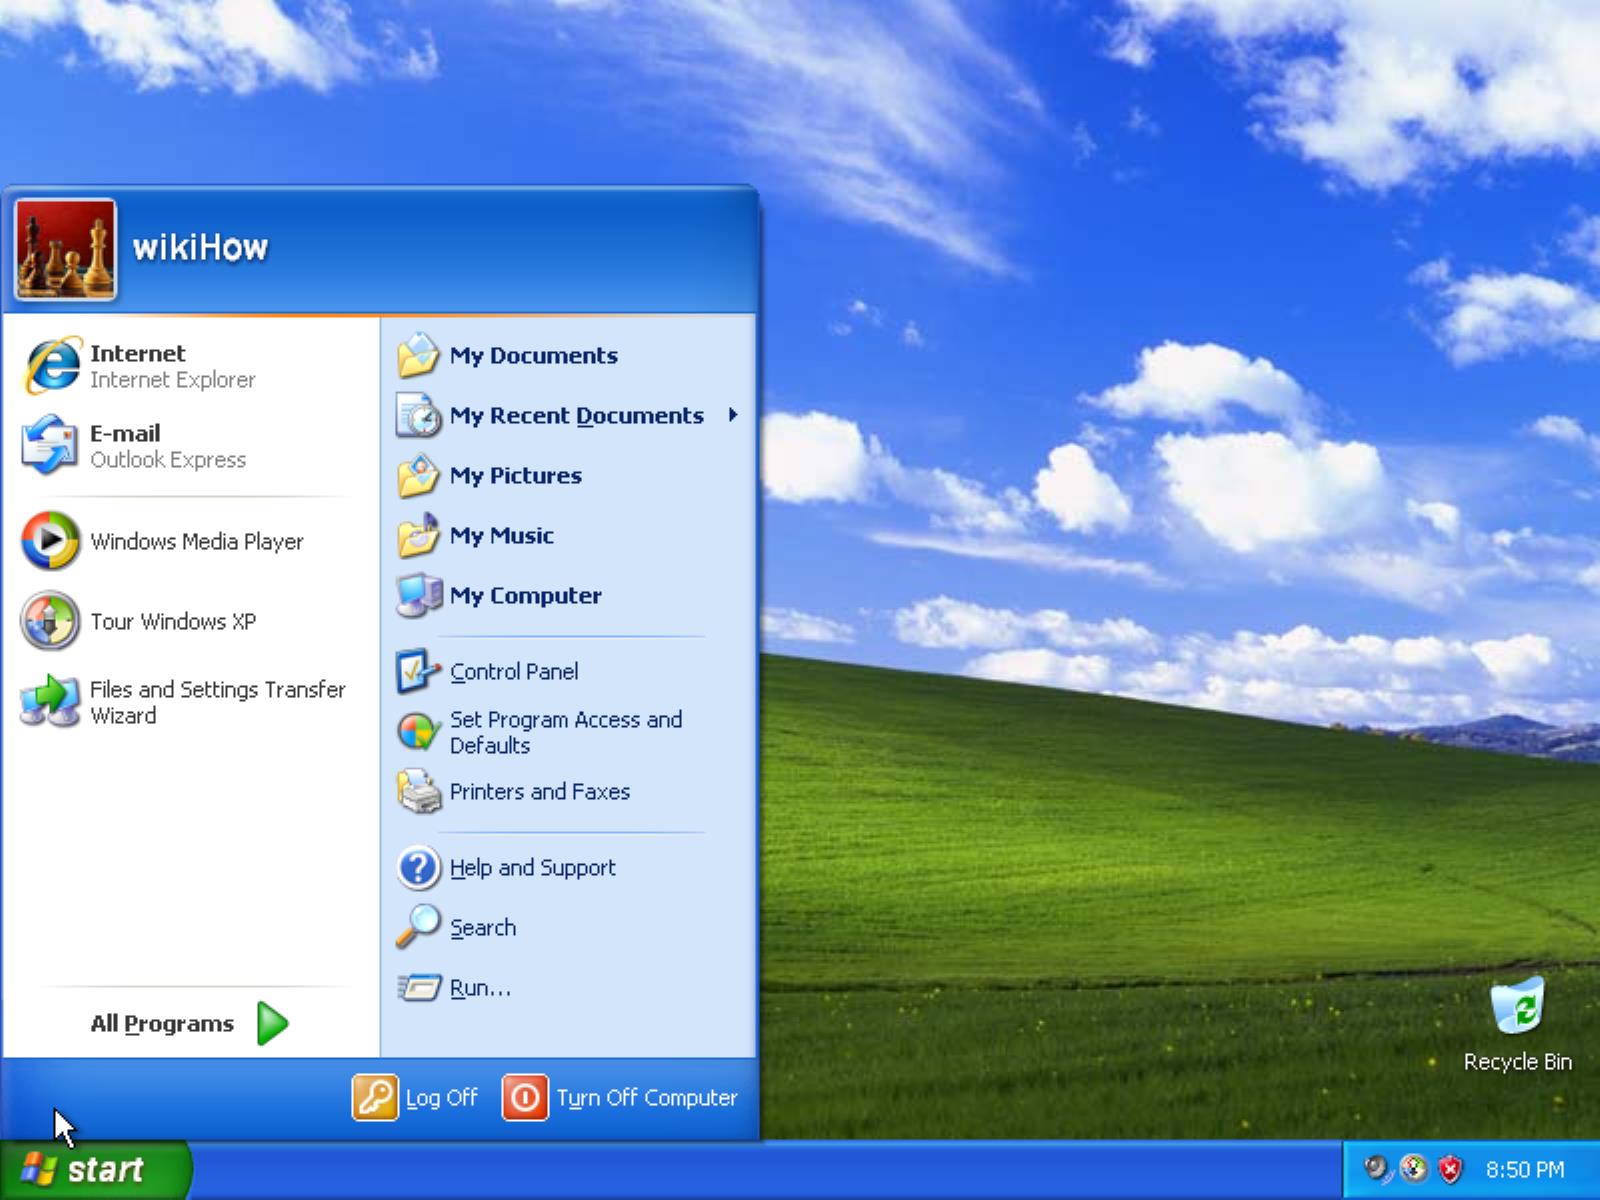 Windows XP Backgrounds on Wallpapers Vista